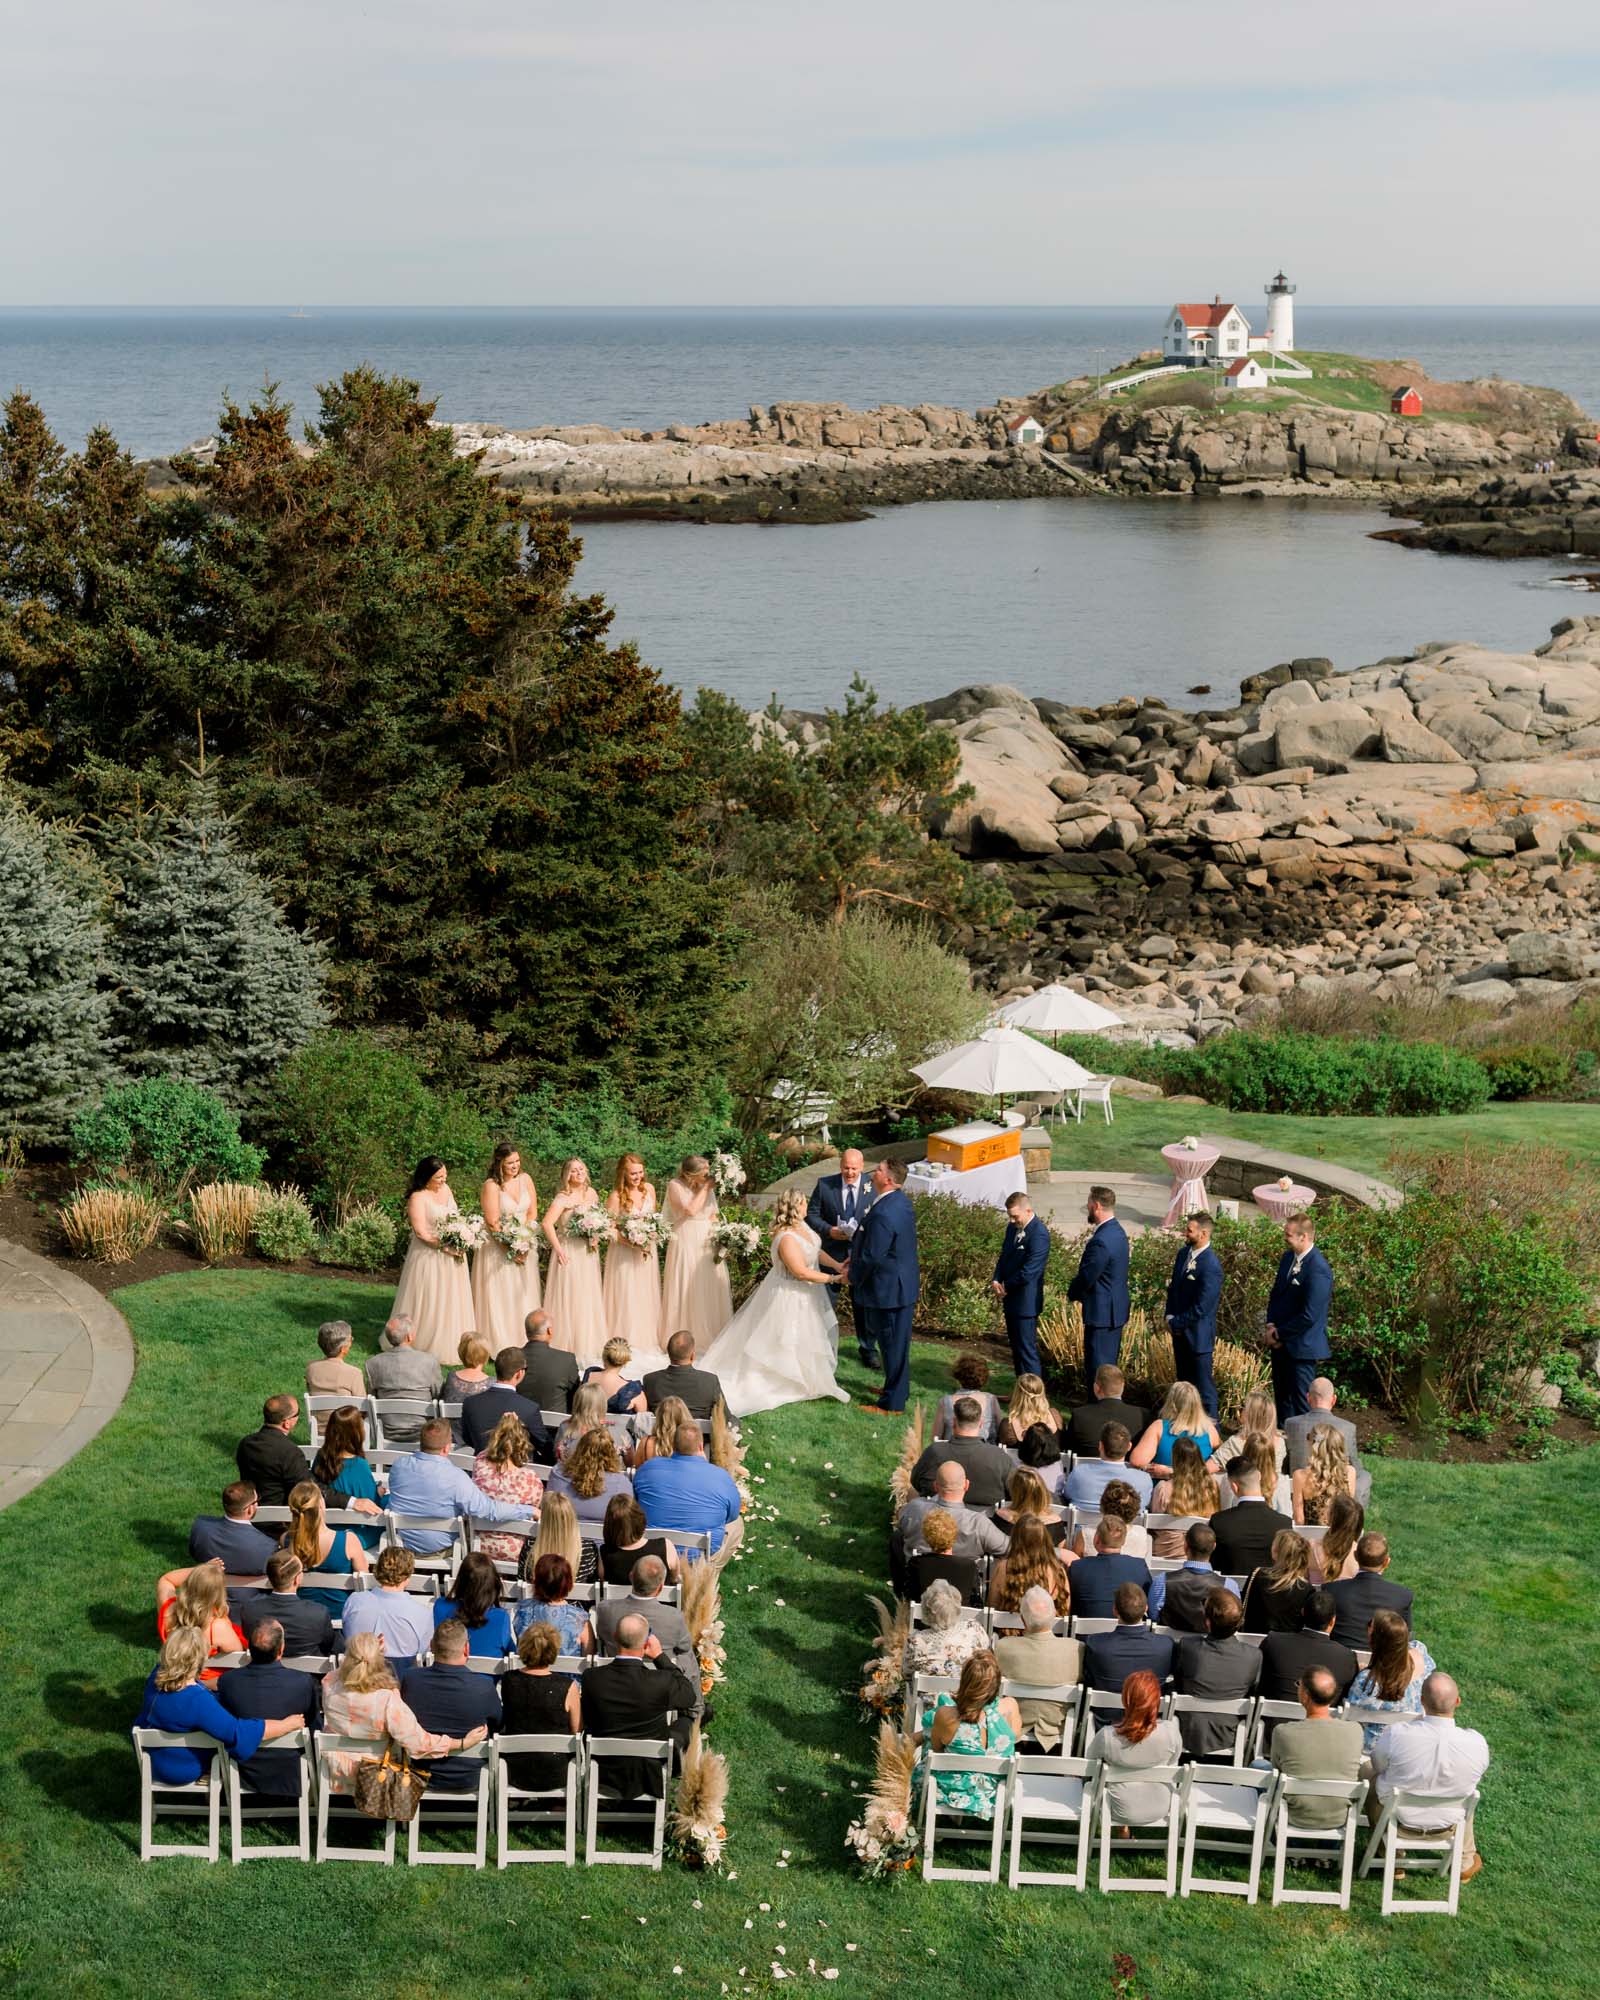 Bird's eye view of wedding ceremony at Viewpoint Hotel in York Maine with Nubble light in the distance.